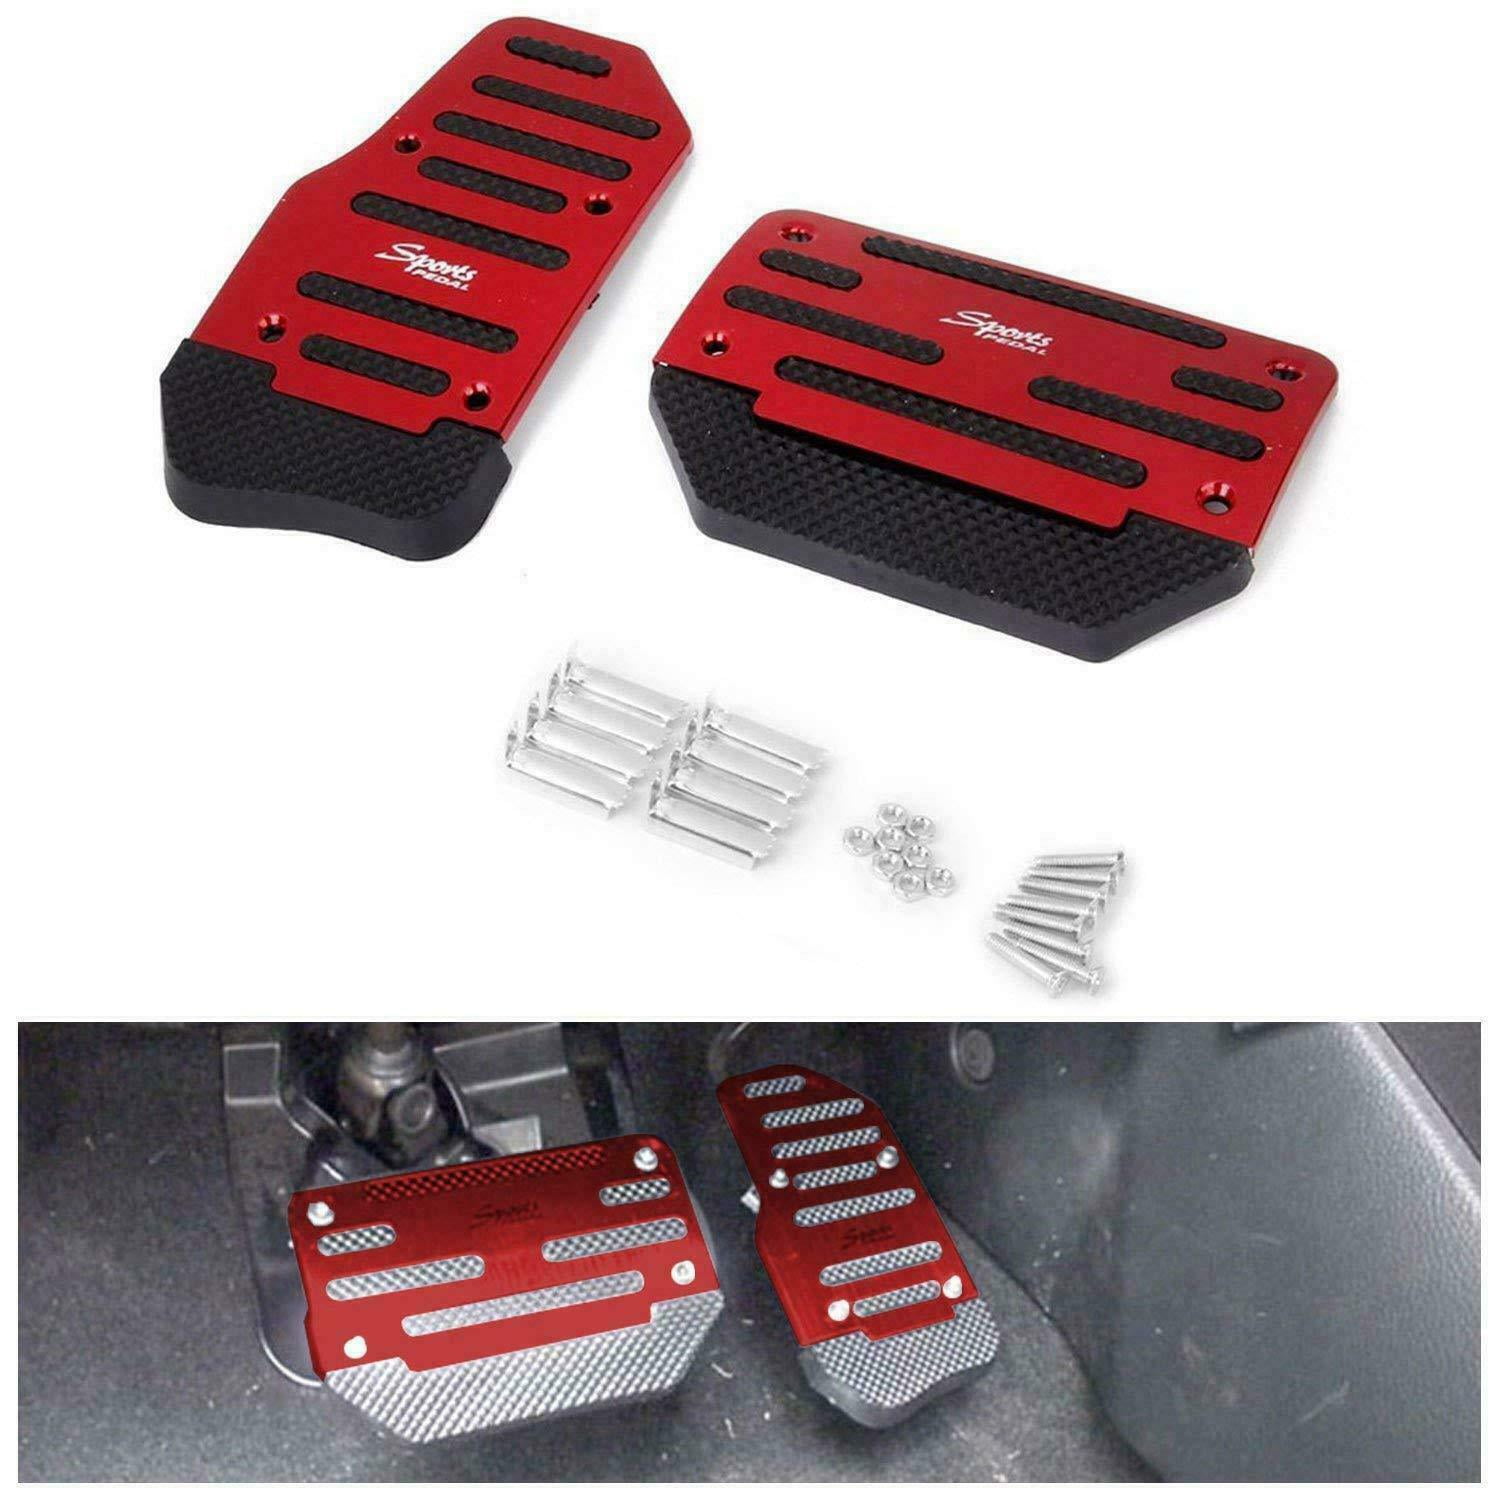 Universal Car Pedal Brake Non-Slip Accelerator Gas Pedals Pads Covers